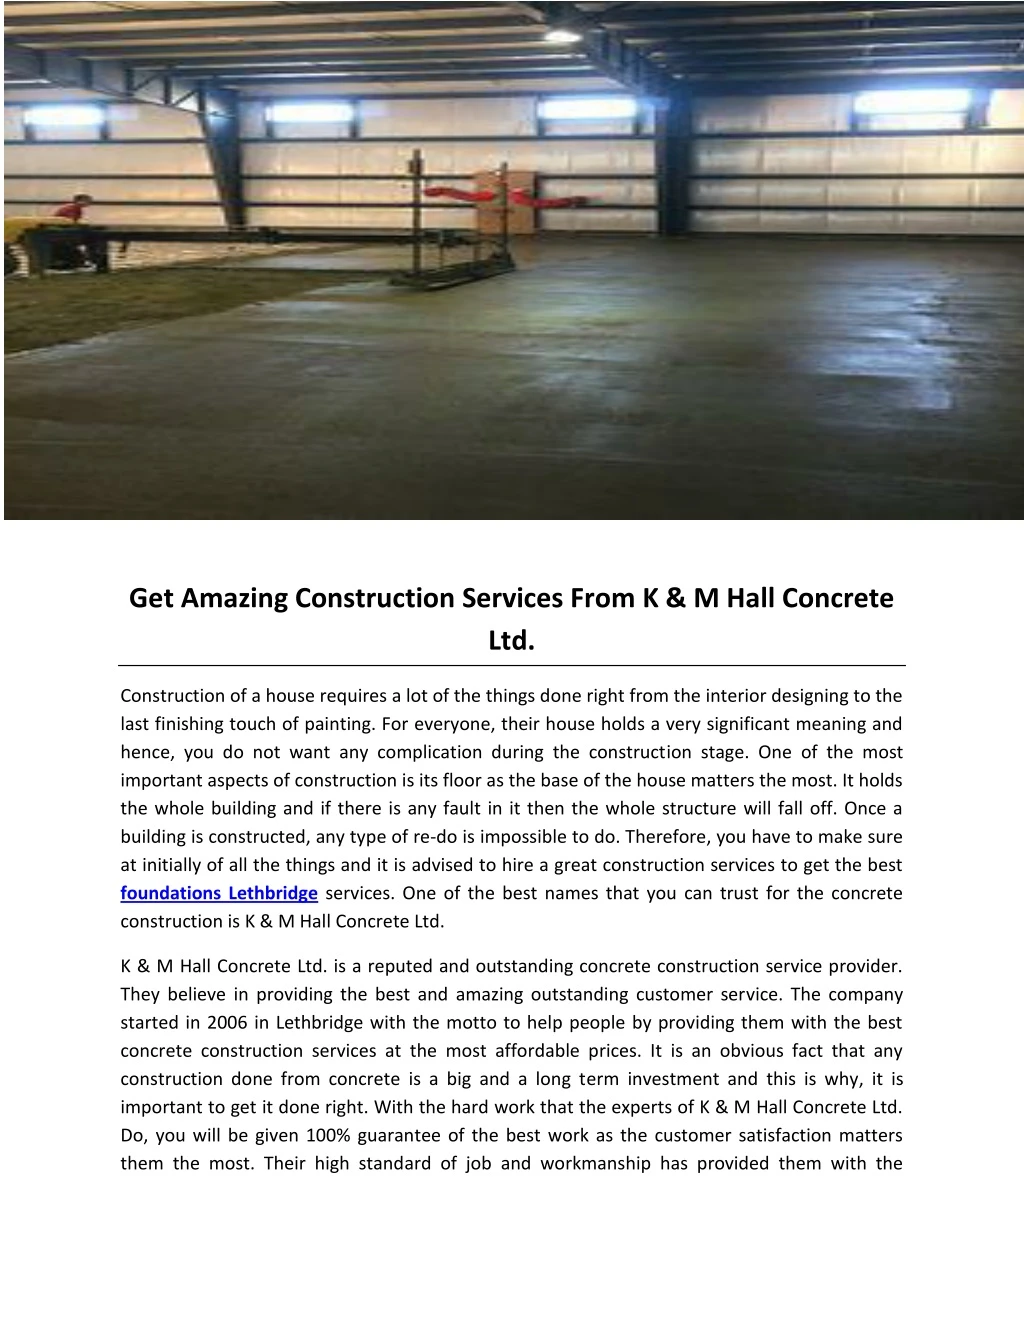 get amazing construction services from k m hall